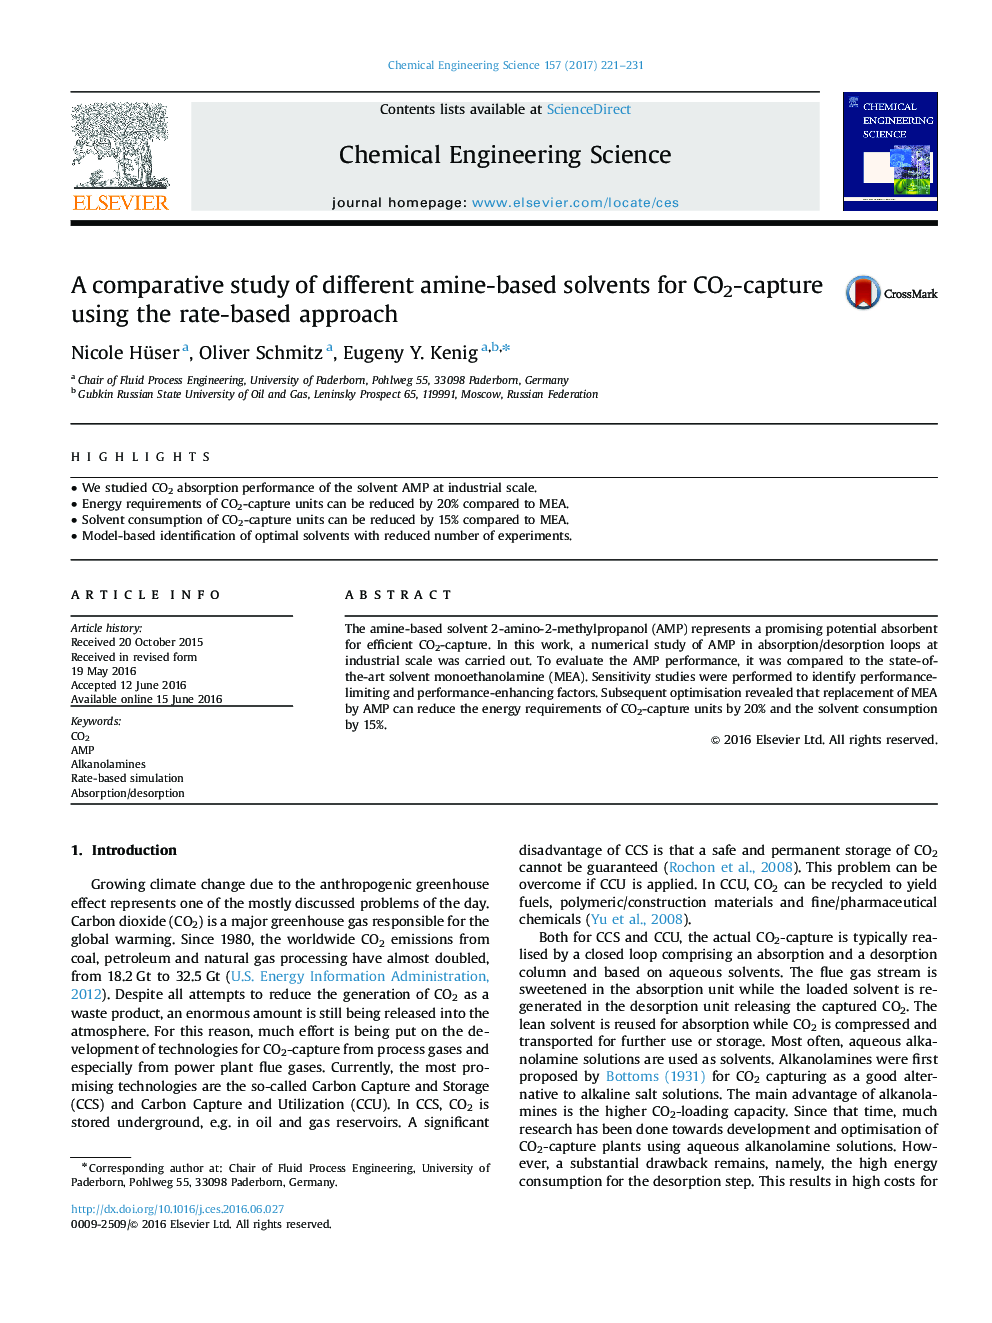 A comparative study of different amine-based solvents for CO2-capture using the rate-based approach